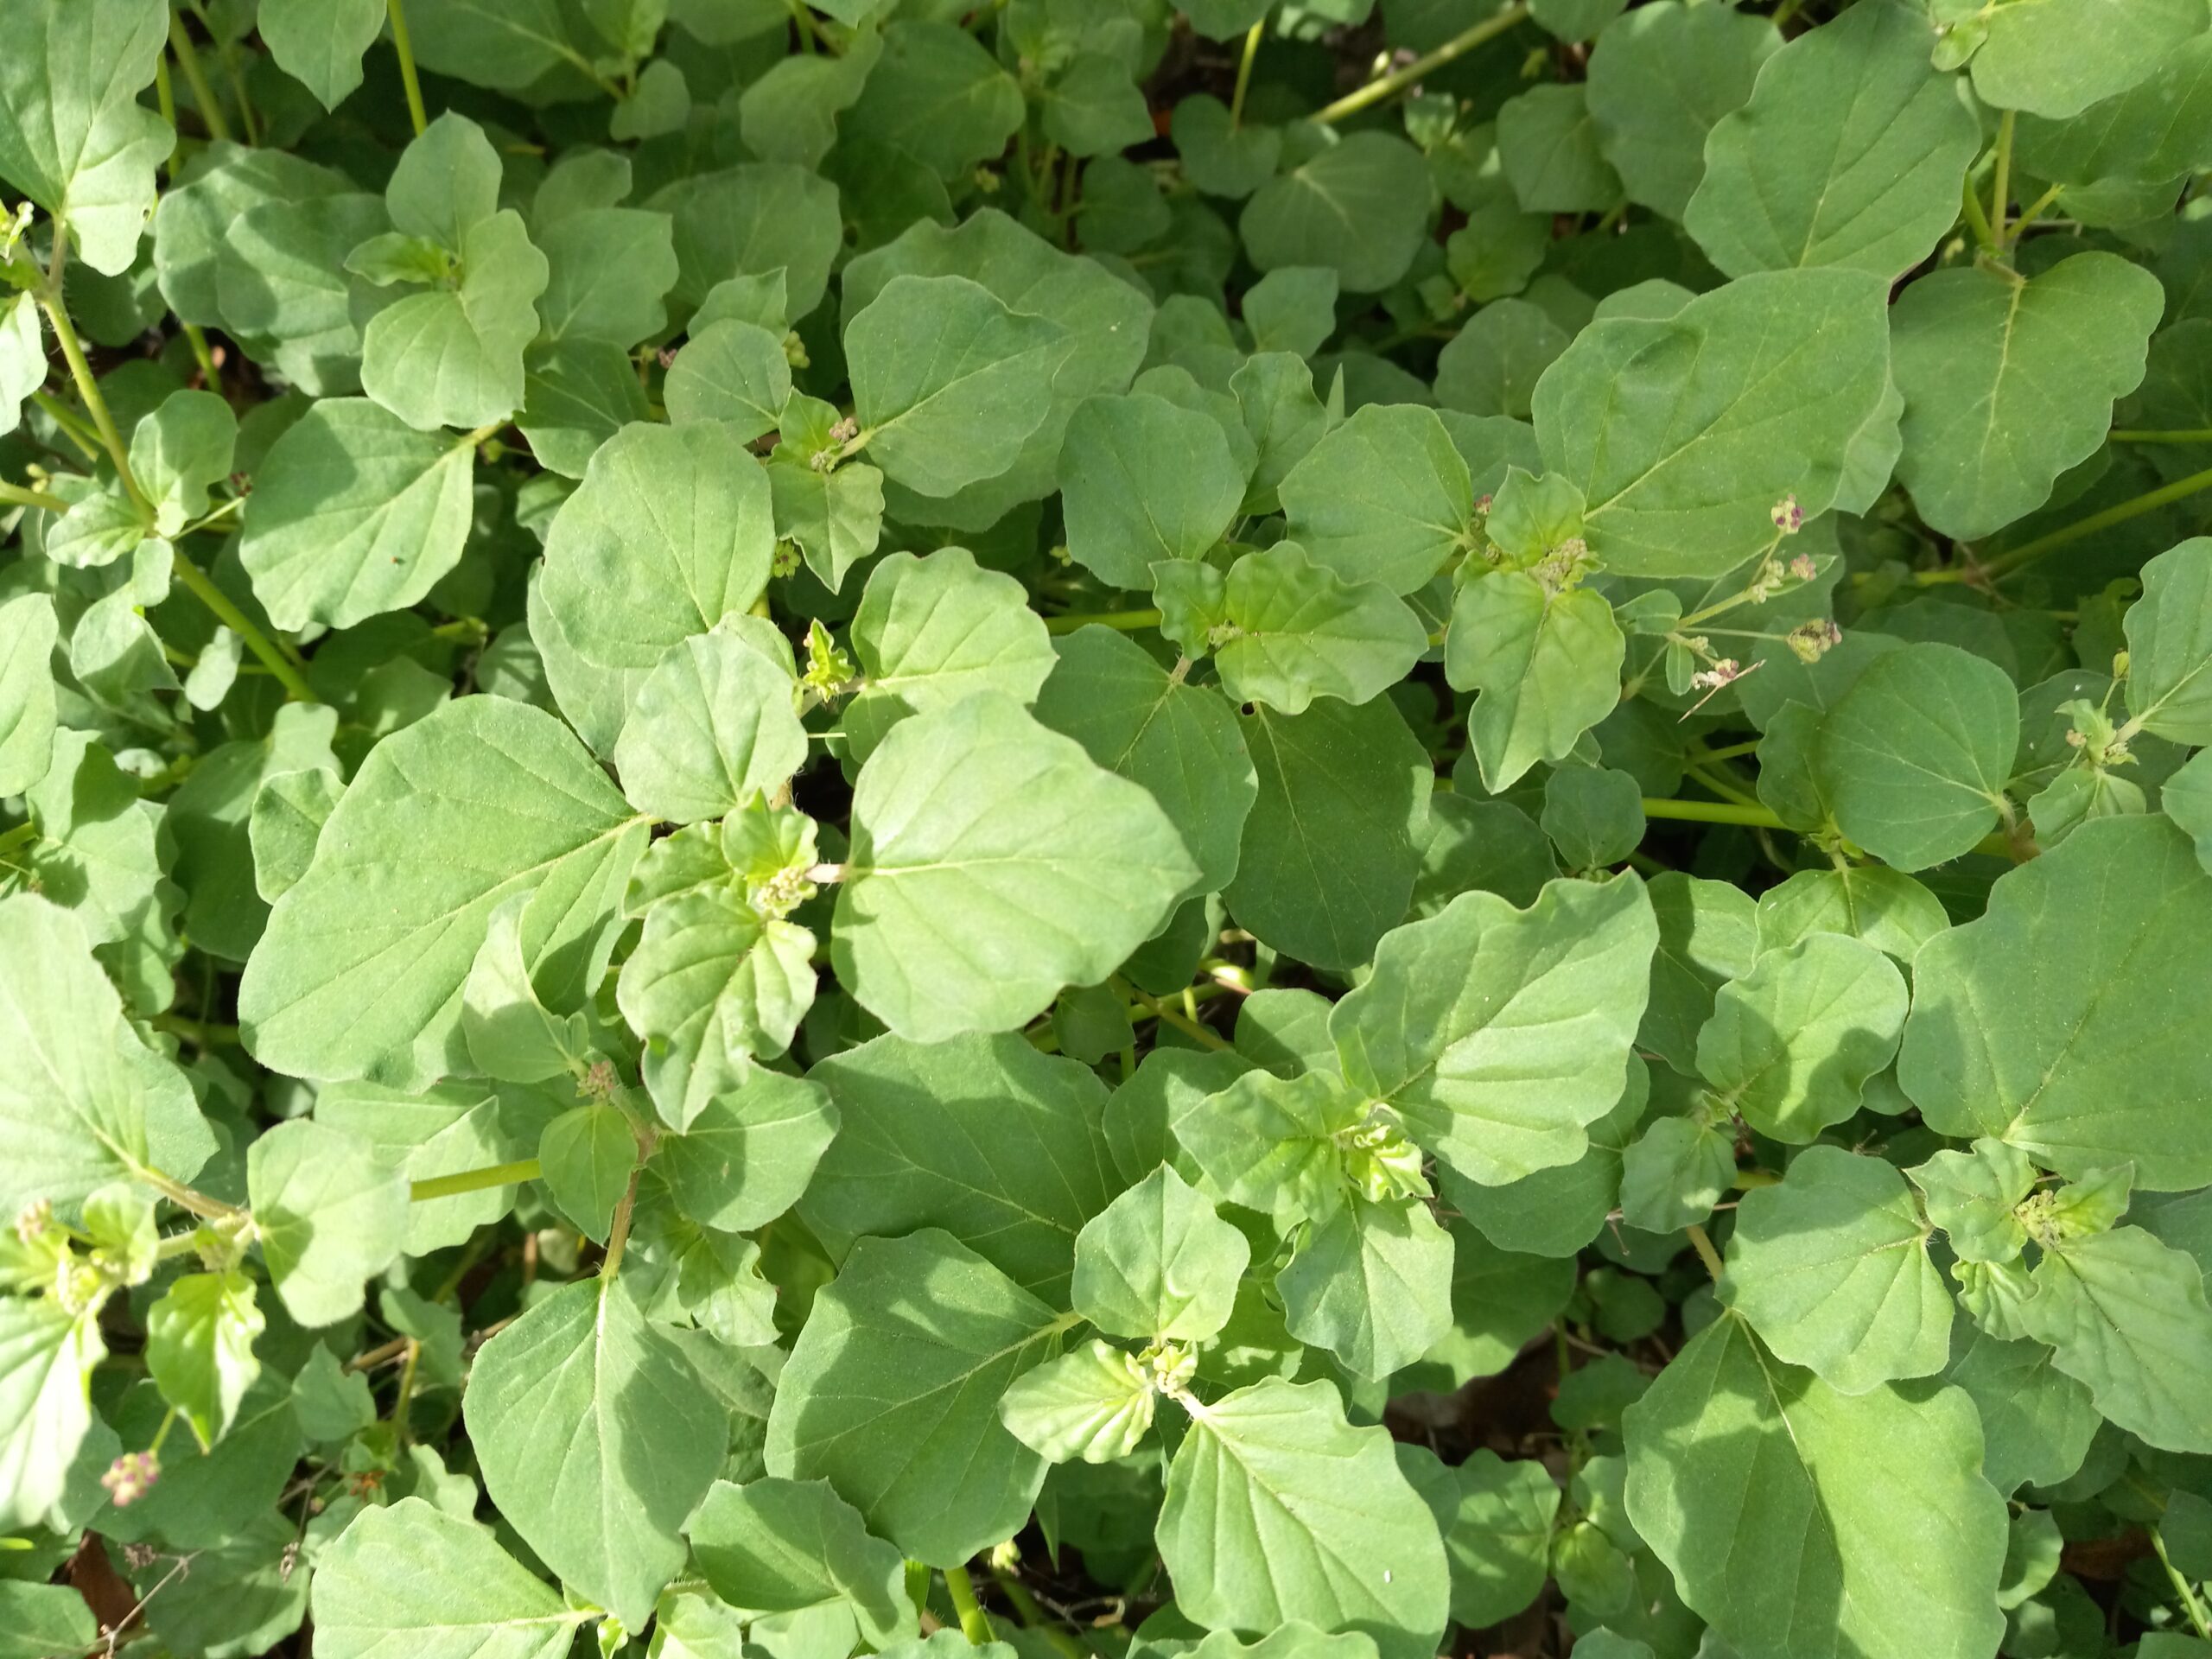 Batabata (Boerhavia diffusa) is another weed used in our kallaloo. Batabata is a weed that grows throughout the Virgin Islands. Some ingredients include fish, land crabs, pigtails, hambones, tannia leaves, batabata, Whitey Mary, Manbower, Papalulu, Sea pussly or Purslane, thyme, hot pepper, and okra. (Photo by Olasee Davis)